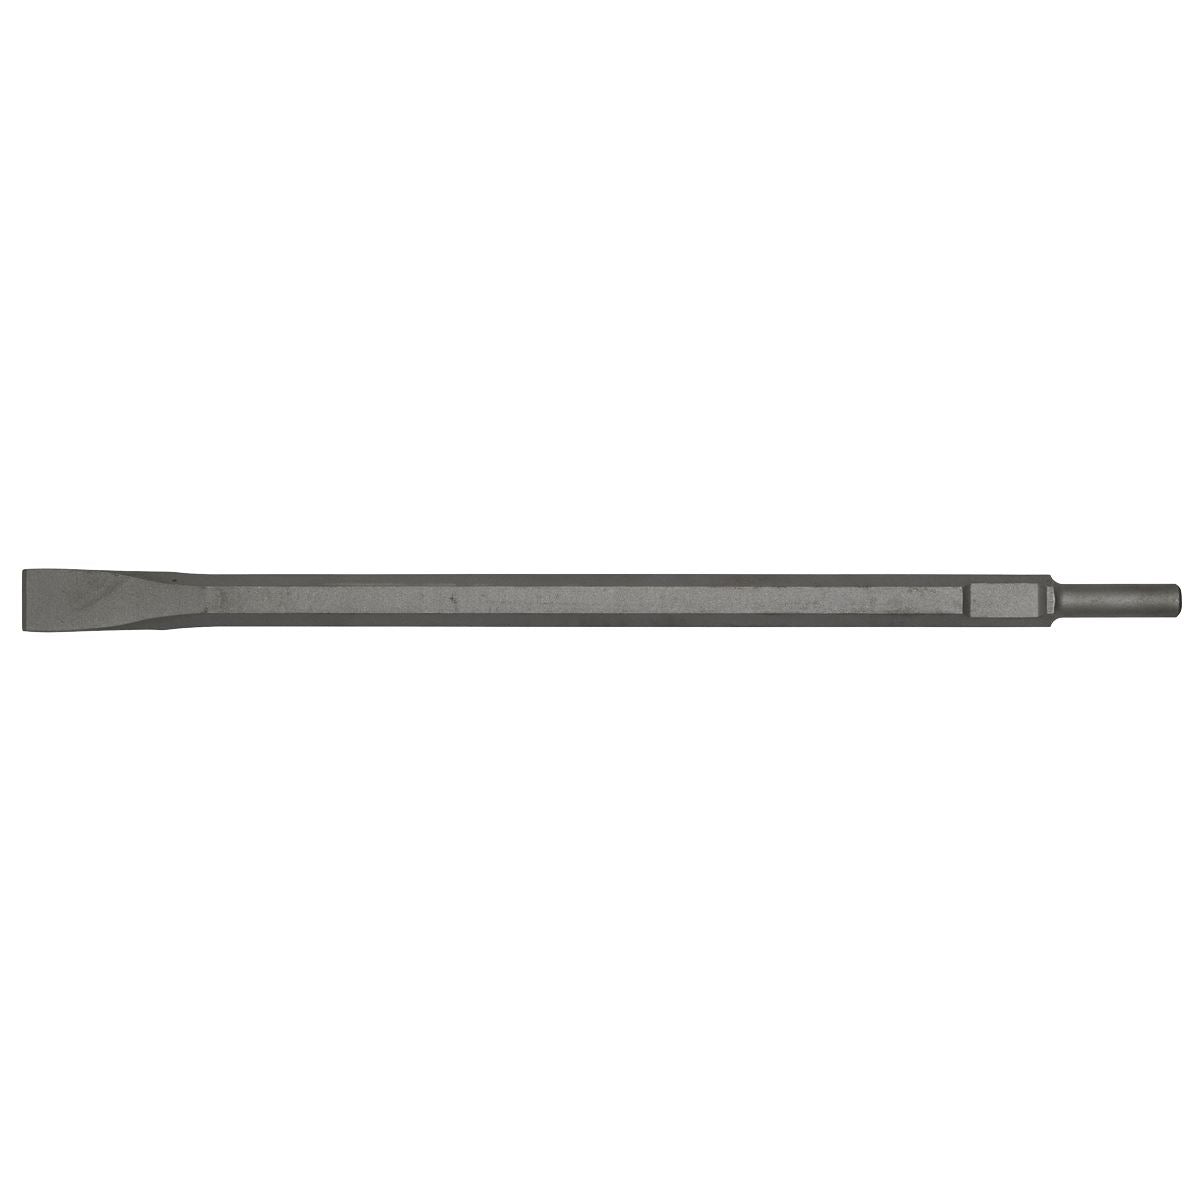 Worksafe by Sealey Chisel 25 x 450mm - Kango 637